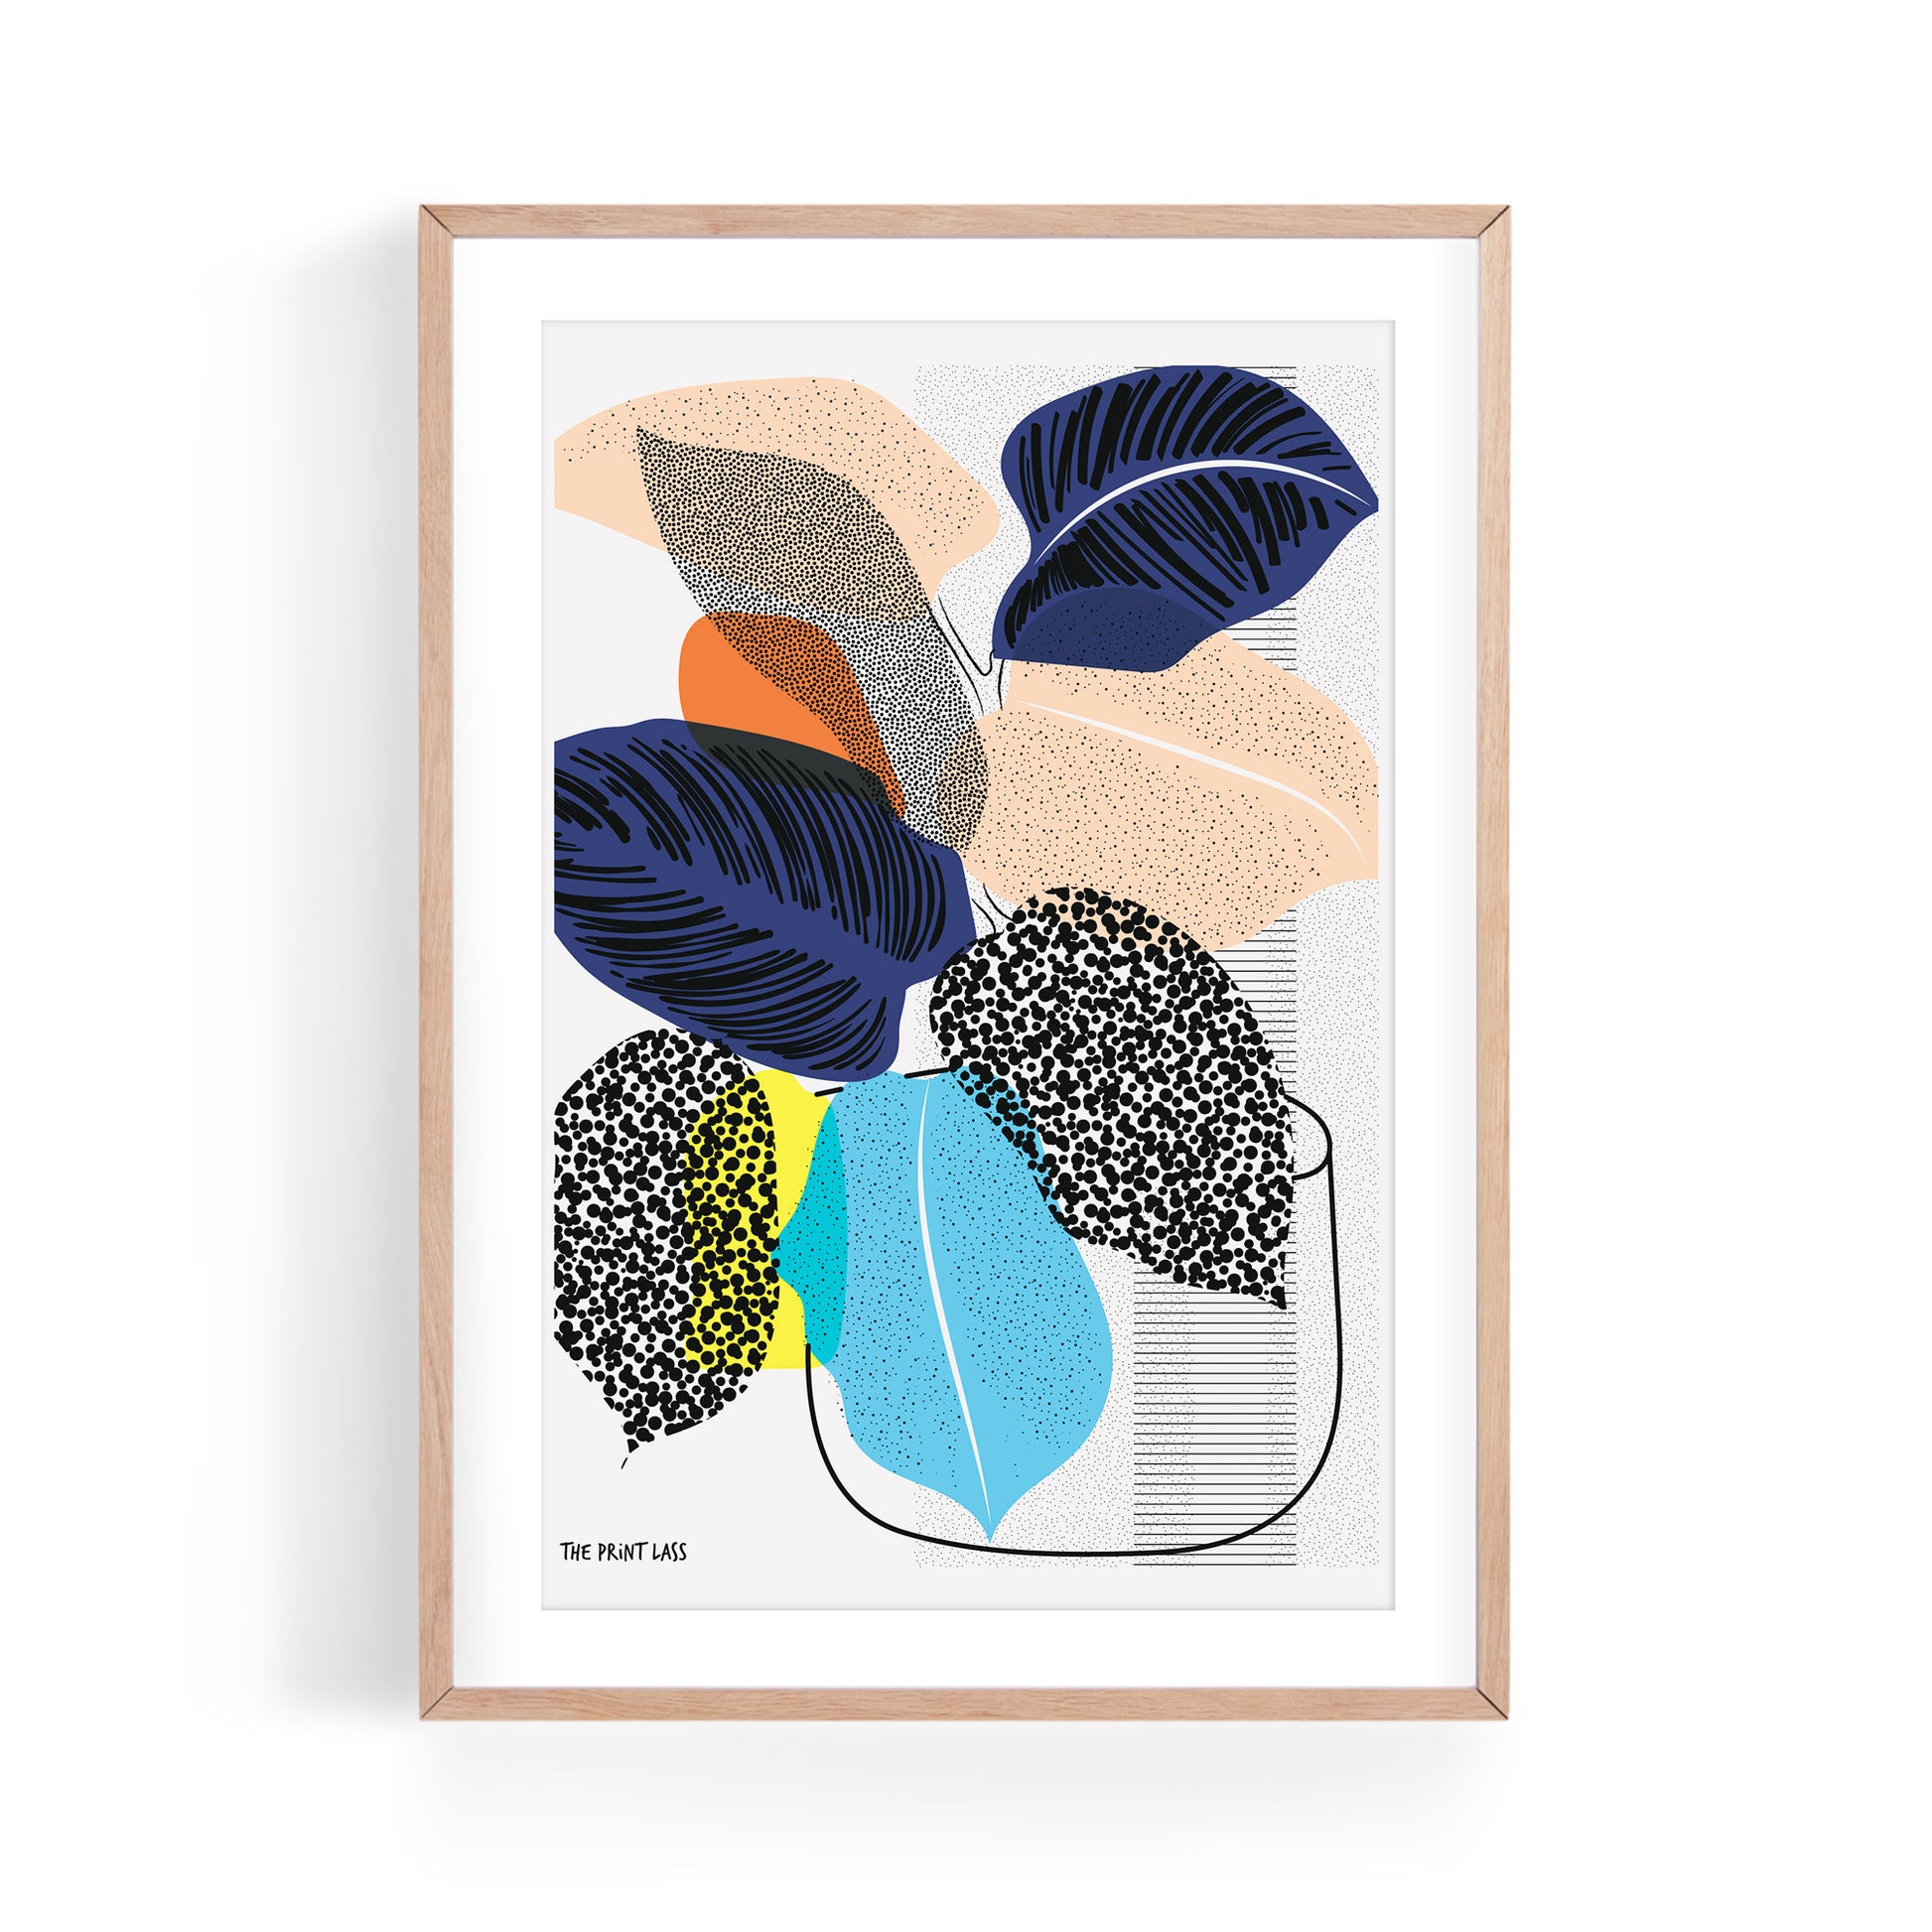 Calathea Plant A4 A5 Art Print by The Print Lass, shown in light wood frame (not included) on white background